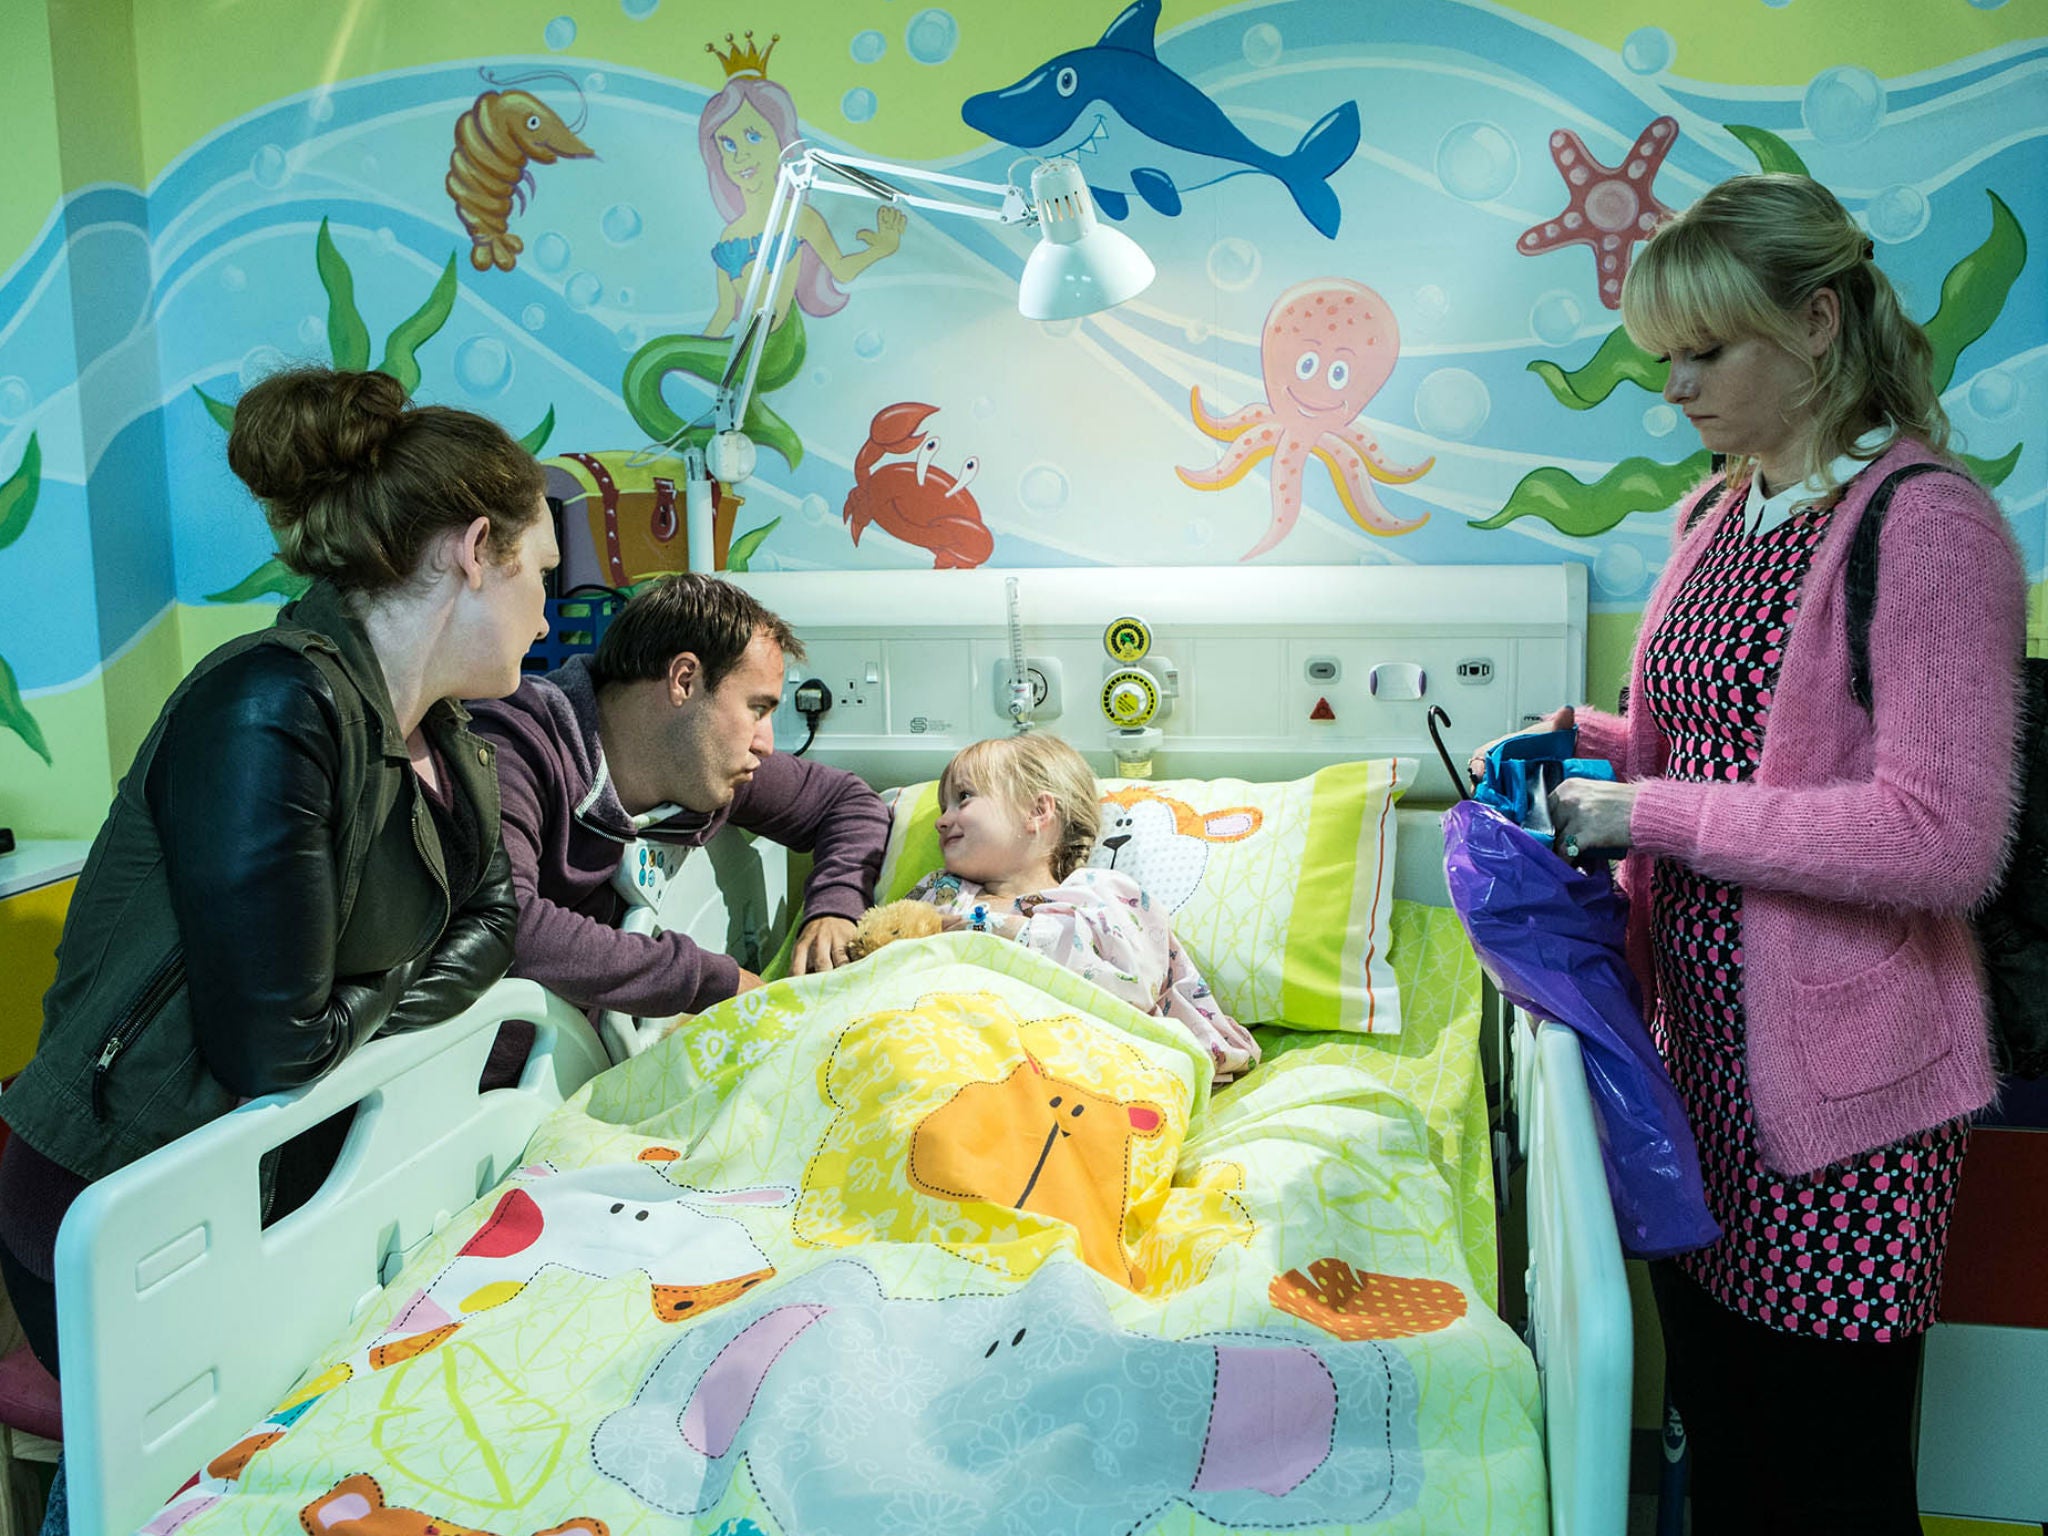 Hope's family gather around her hospital bed in Coronation Street